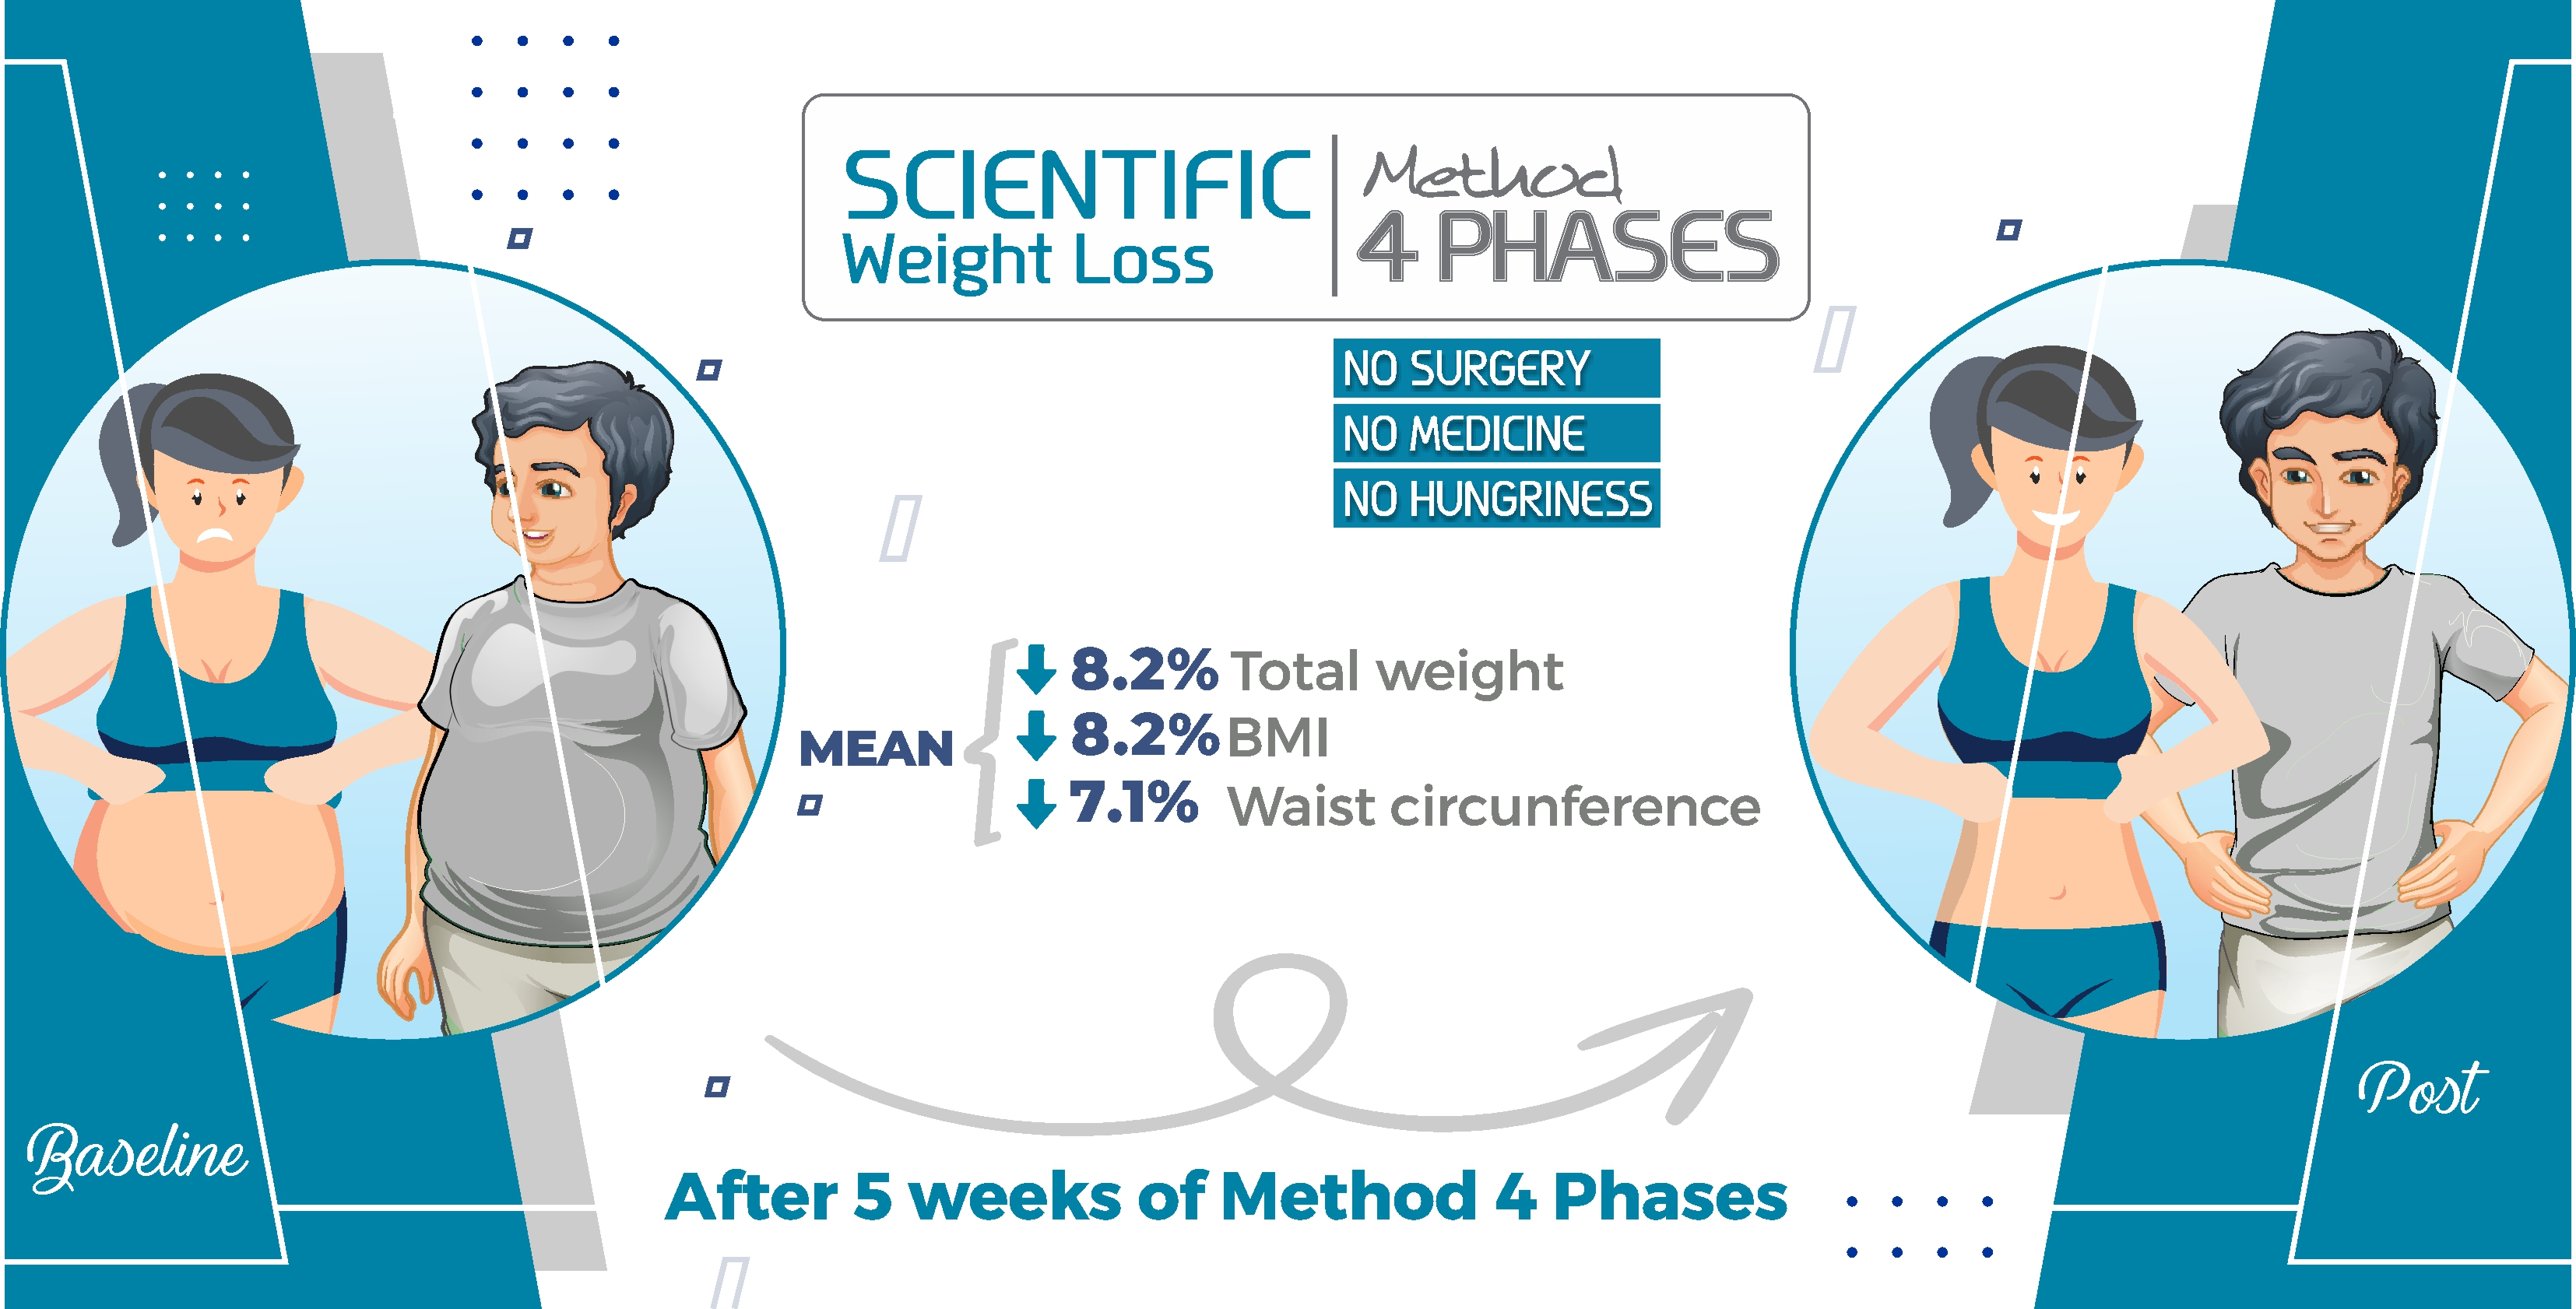 Healthcare | Free Full-Text | From Young to Older, the 4 Phases Method Is  Efficient in Promoting Quick Weight, BMI, and Waist Circumference Reductions